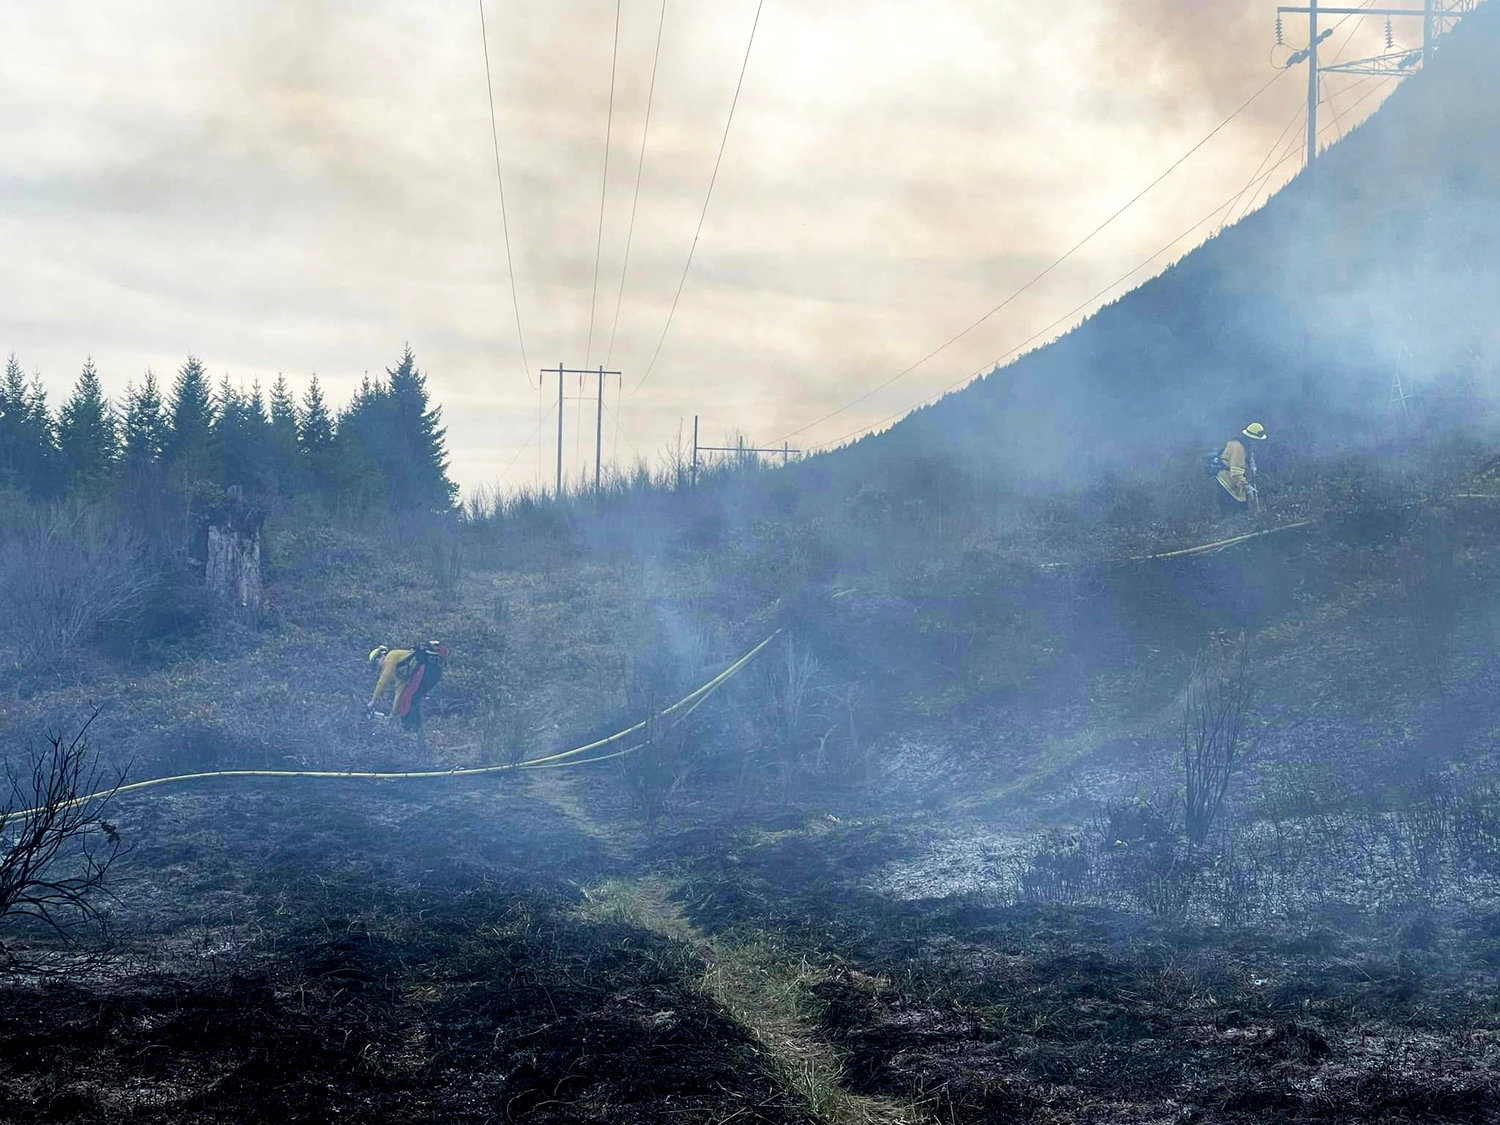 The fire near Spencer Creek Road scorched nearly an acre of state-owned land.